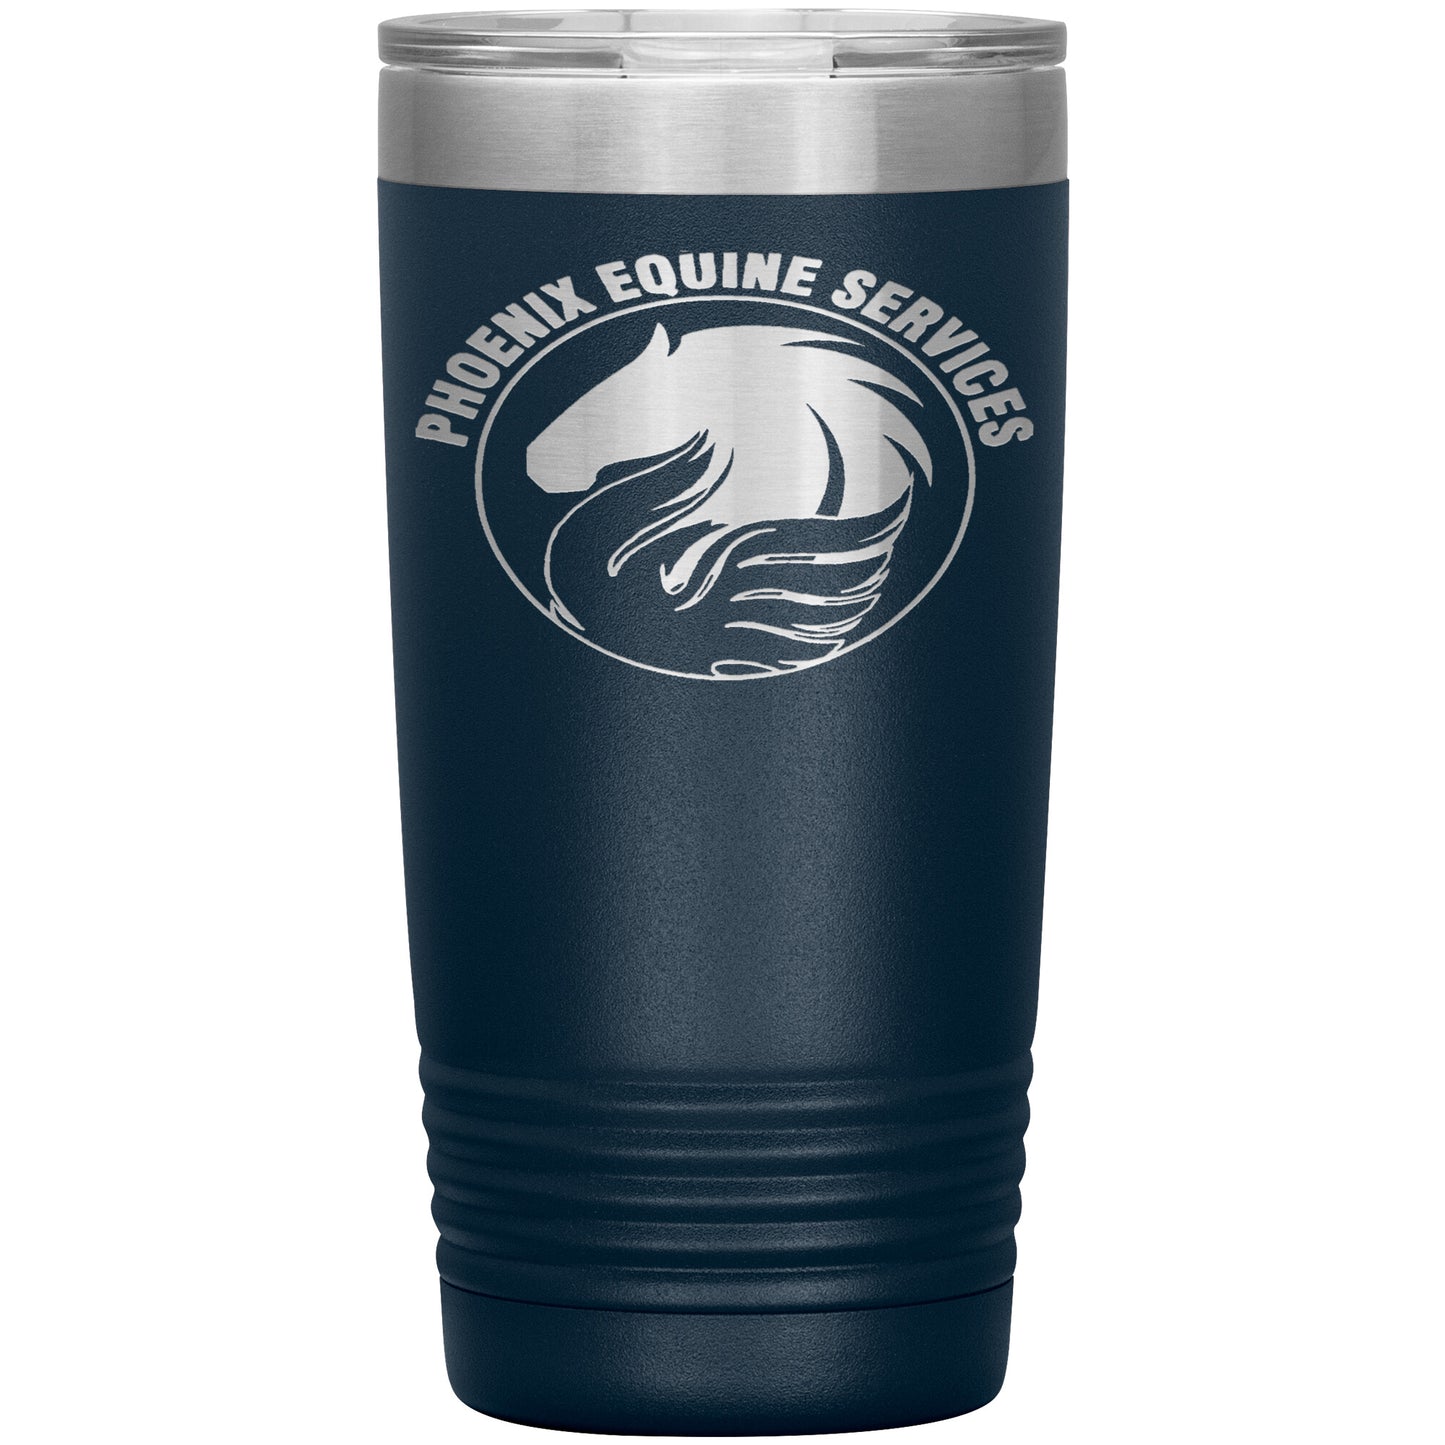 Phoenix Equestrian Logo 20oz Insulated Stainless Steel Tumbler